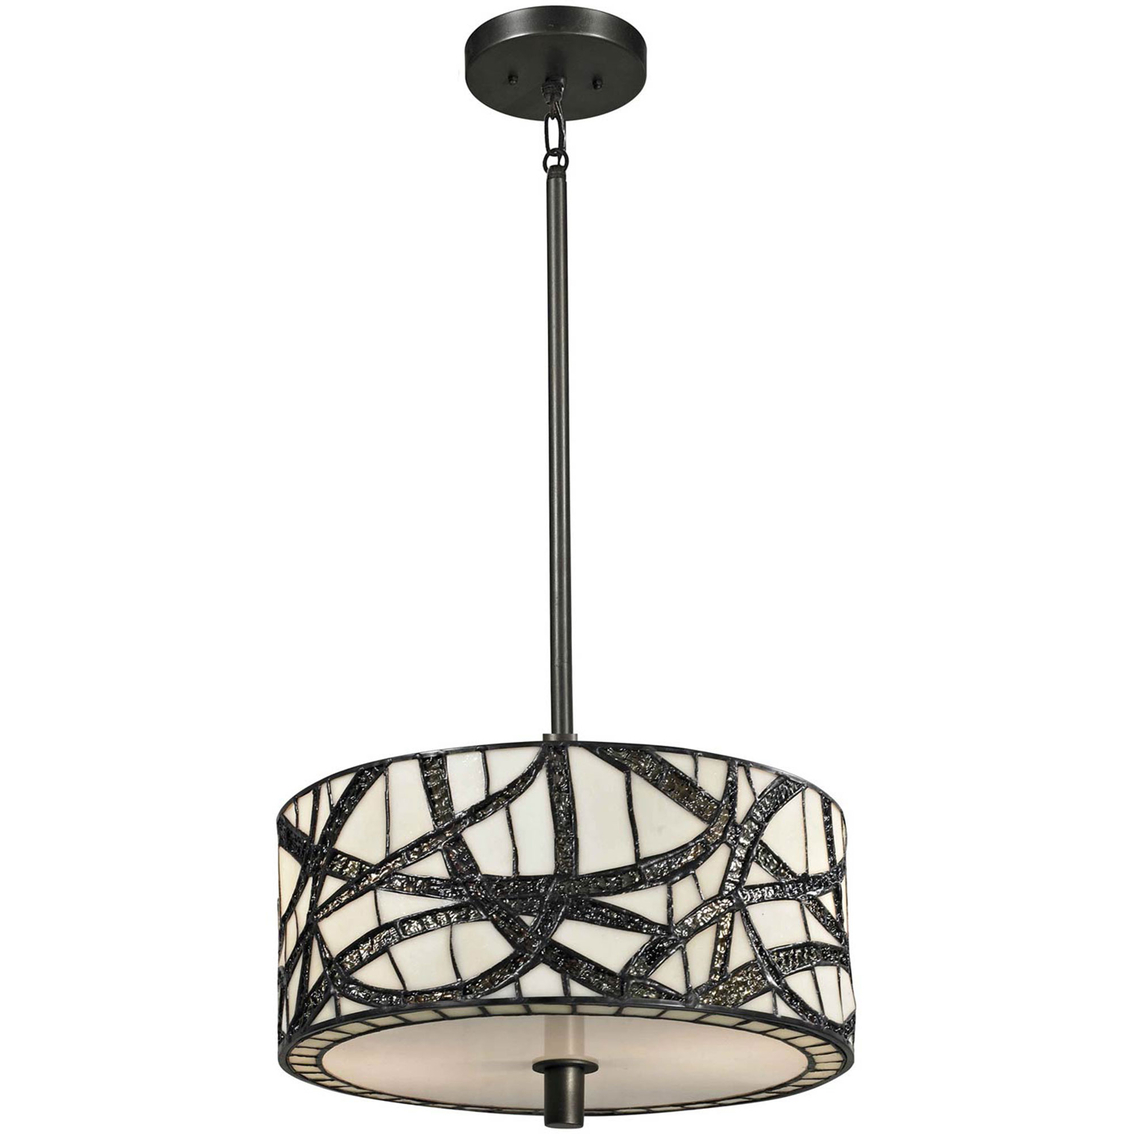 Dale Tiffany Willow Cottage Tiffany Pendant Light Kit Ceiling